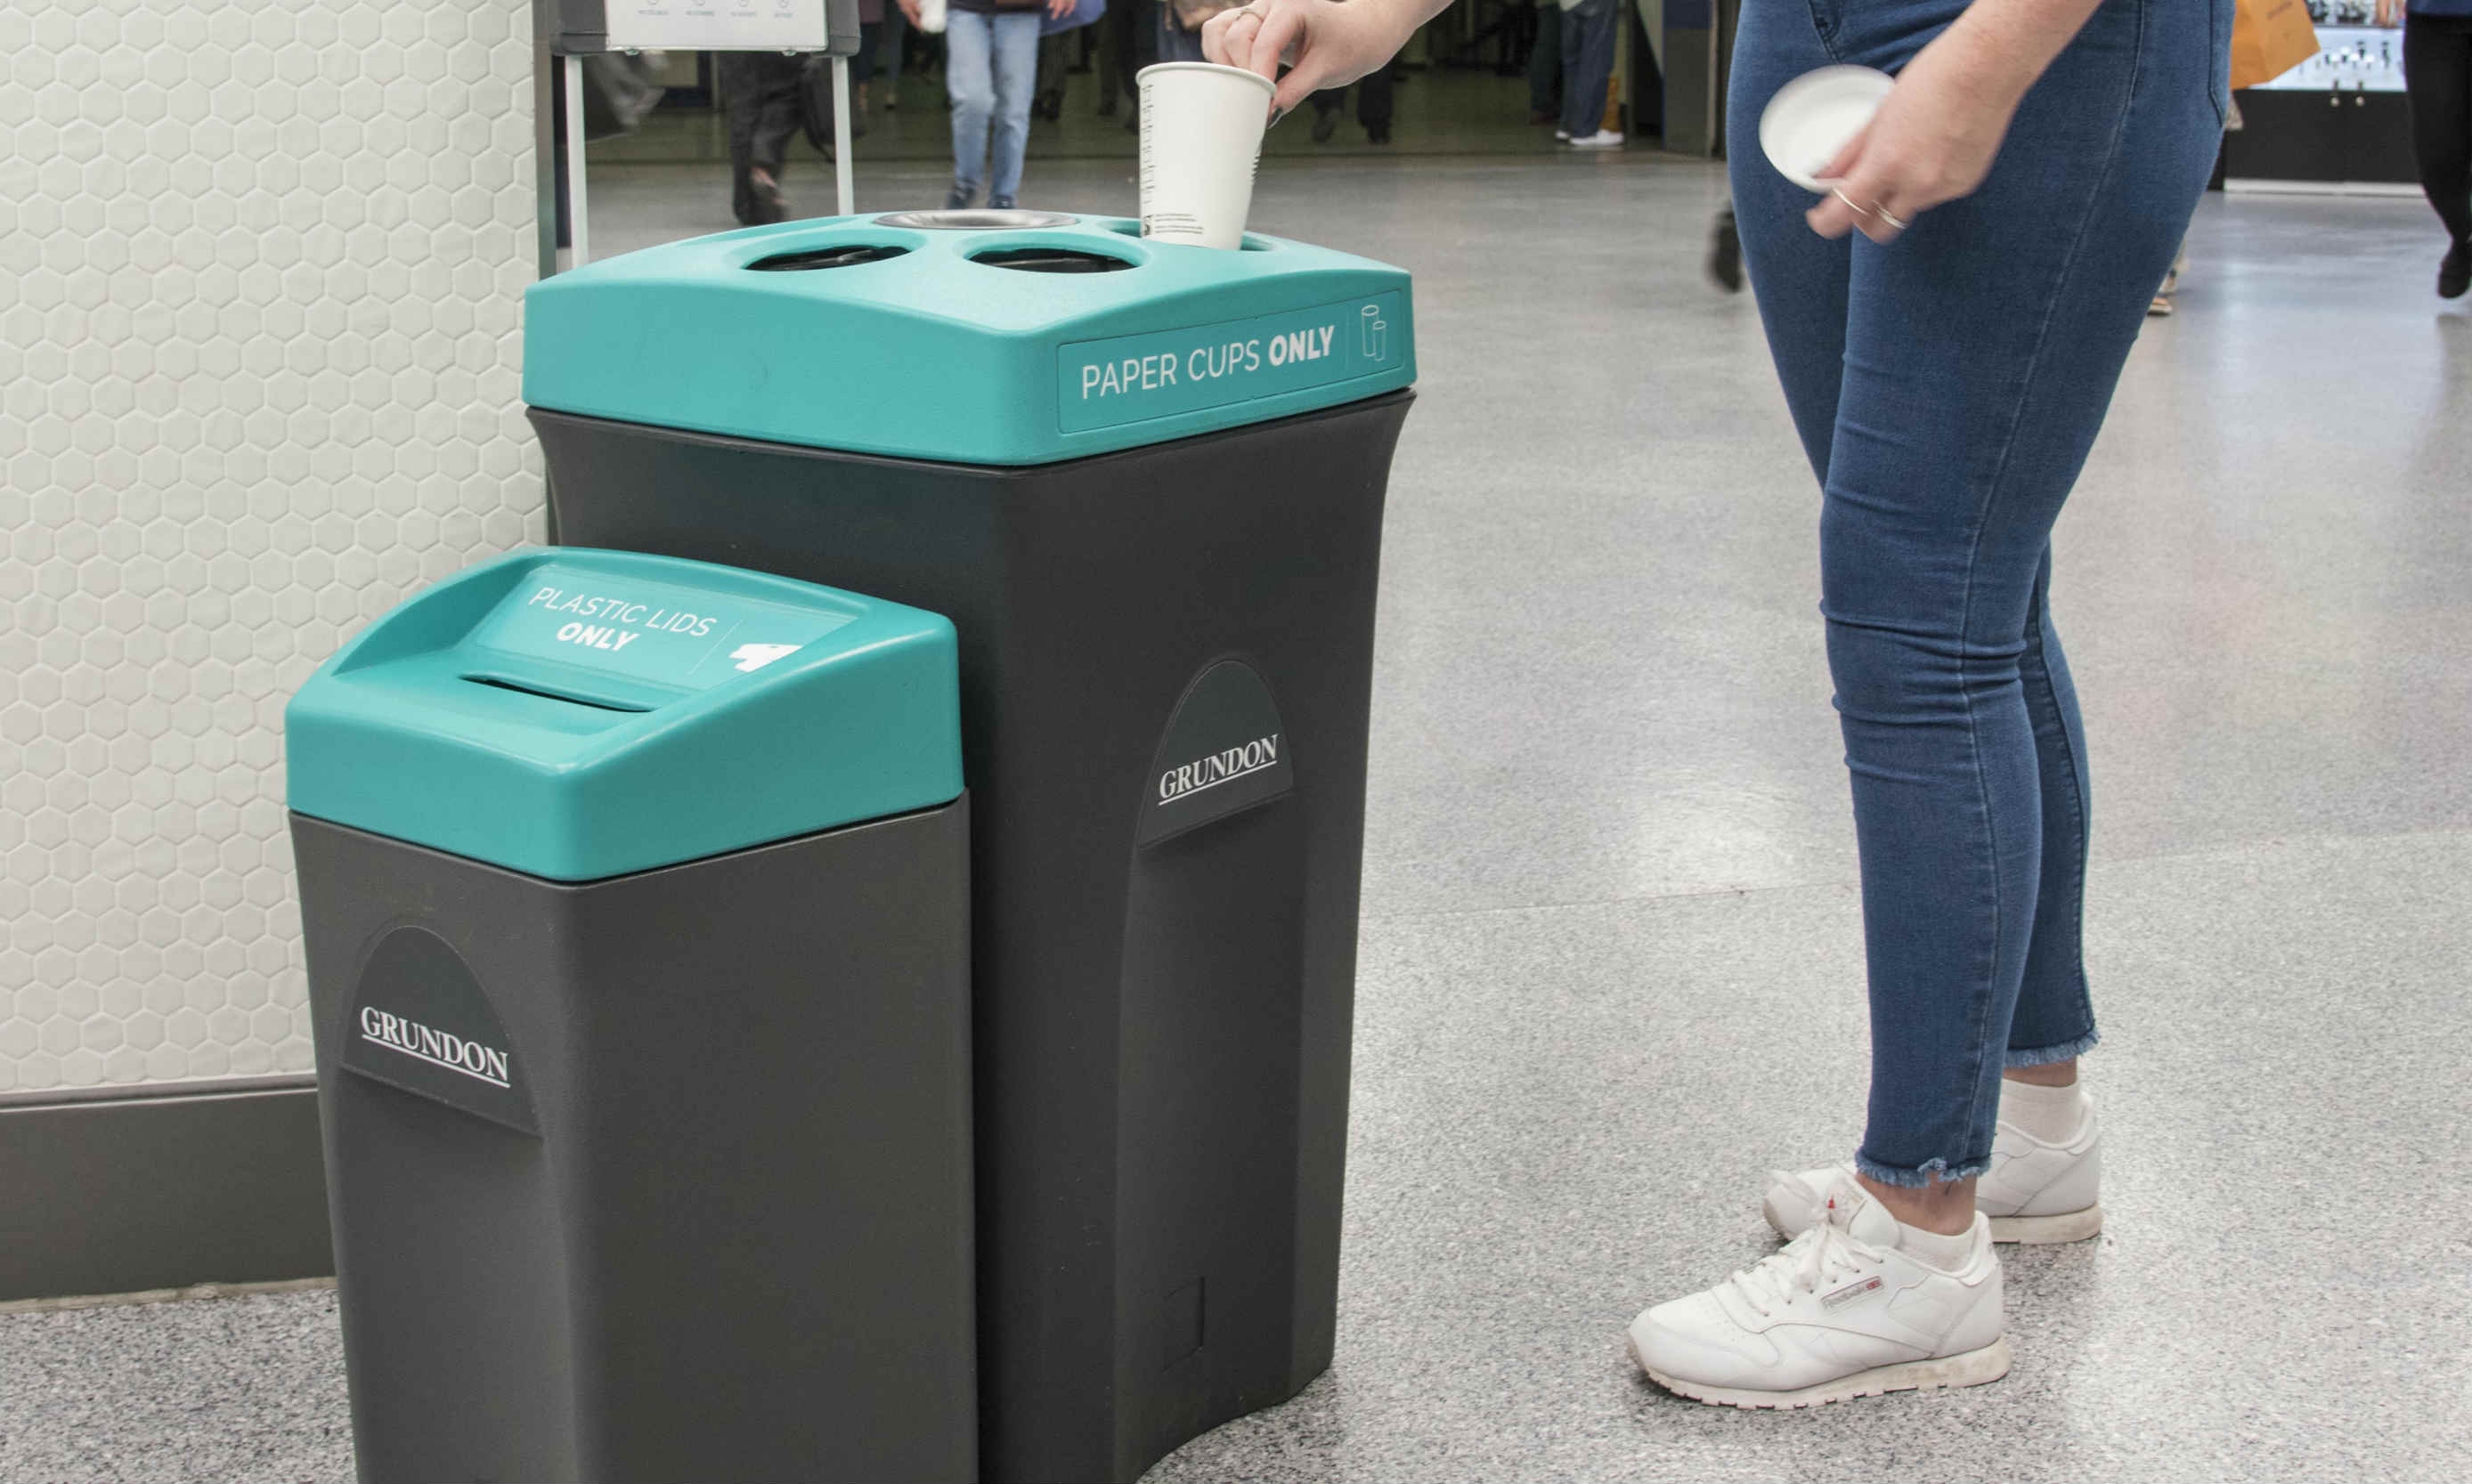 Grundon launches new paper cup recycling service